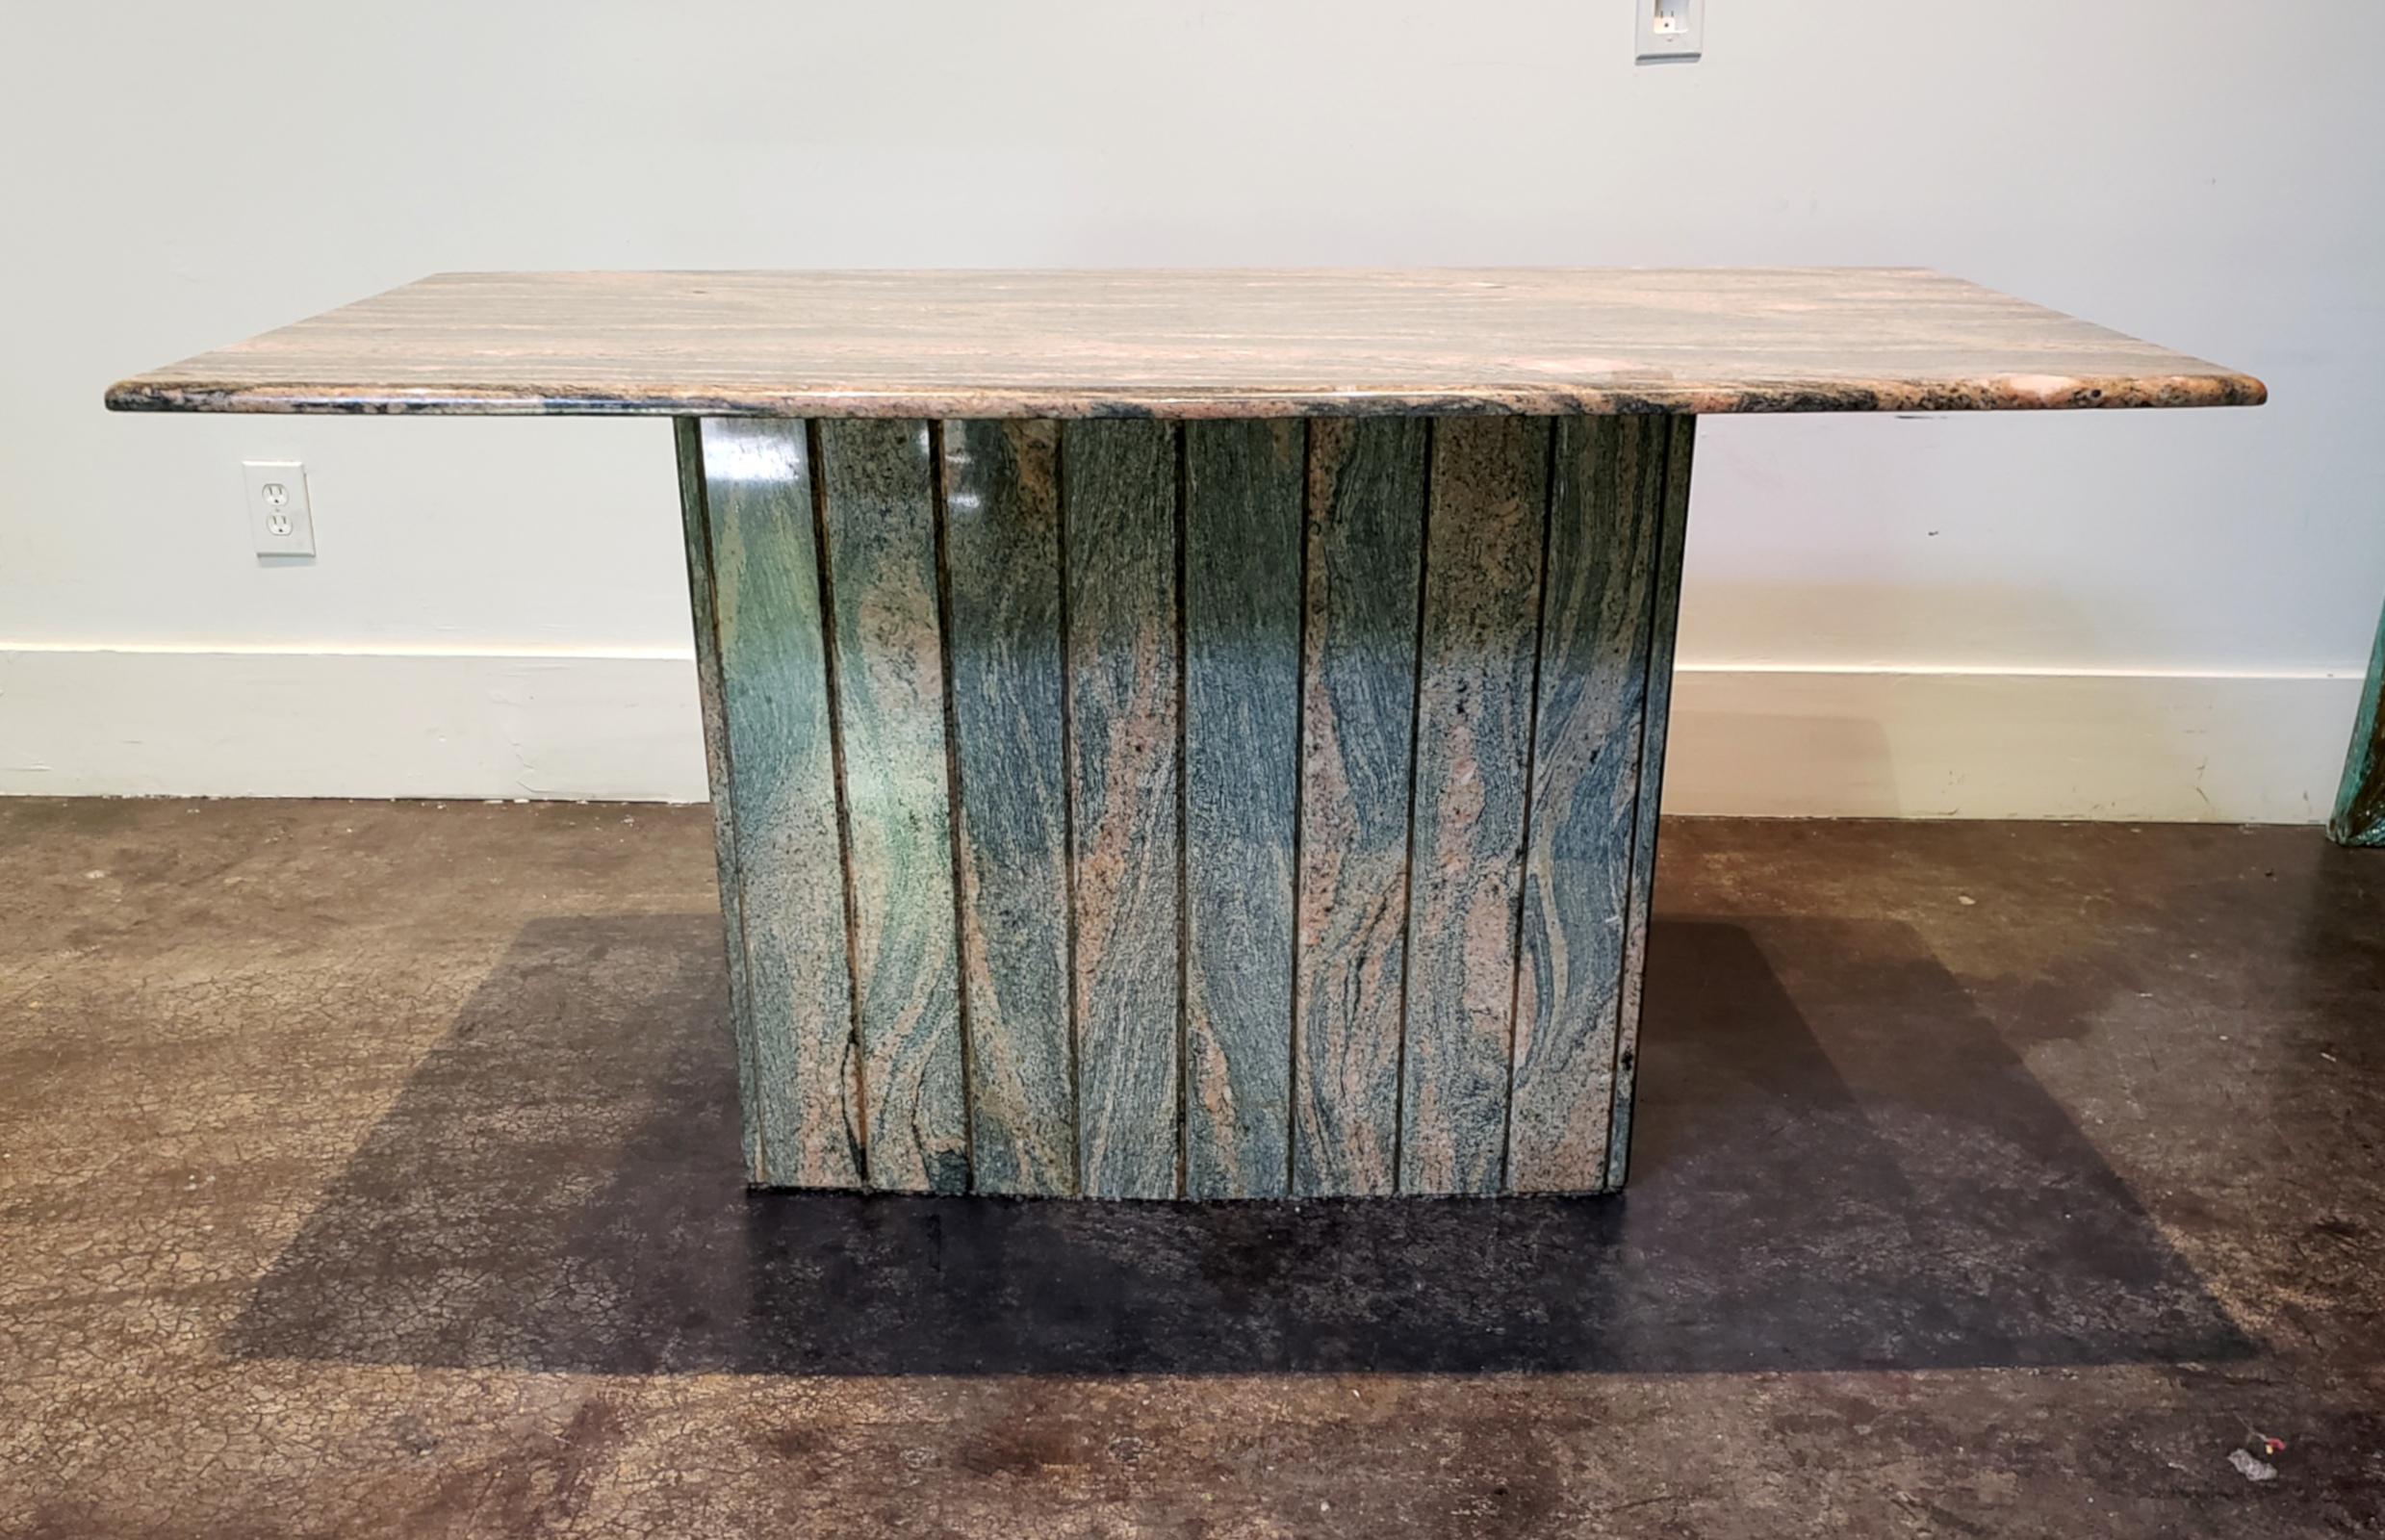 1980s Italian console table in stunning pink and grey marble. Rounded rectangular top on vertically grooved base. Both are wider at the center. 

Measures: Top is 60